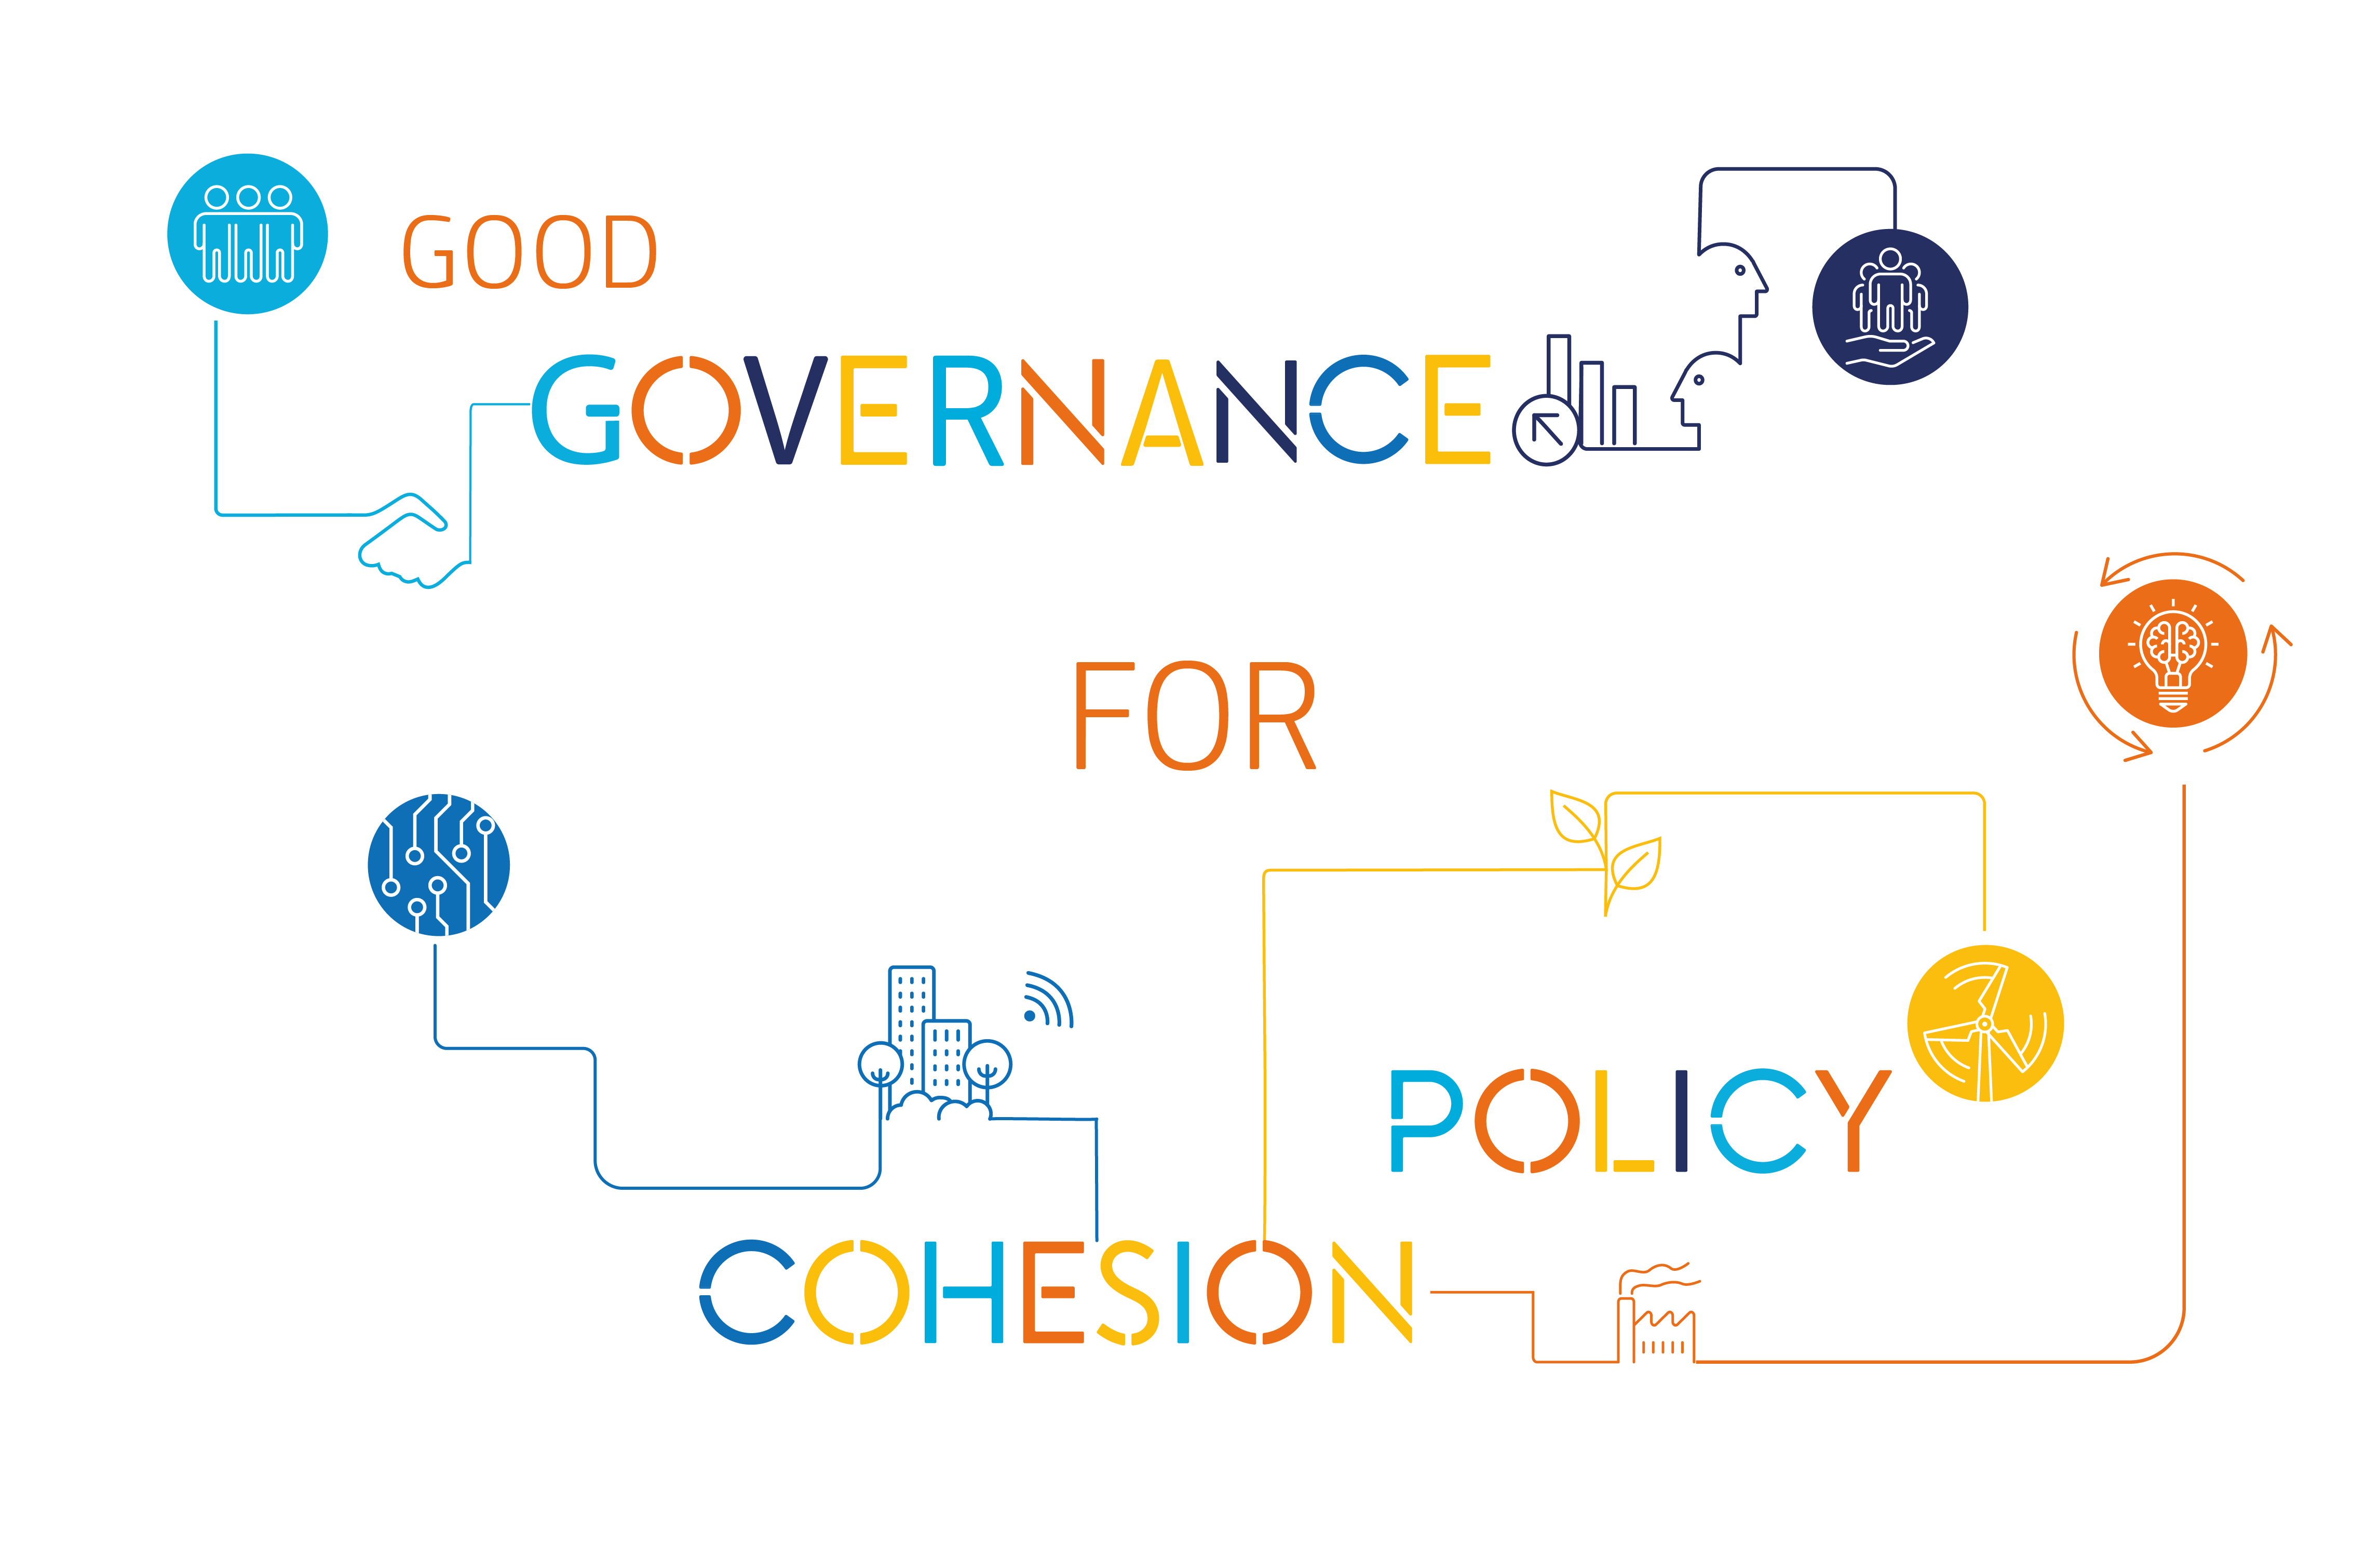 Meet the projects helping citizens to shape Cohesion Policy